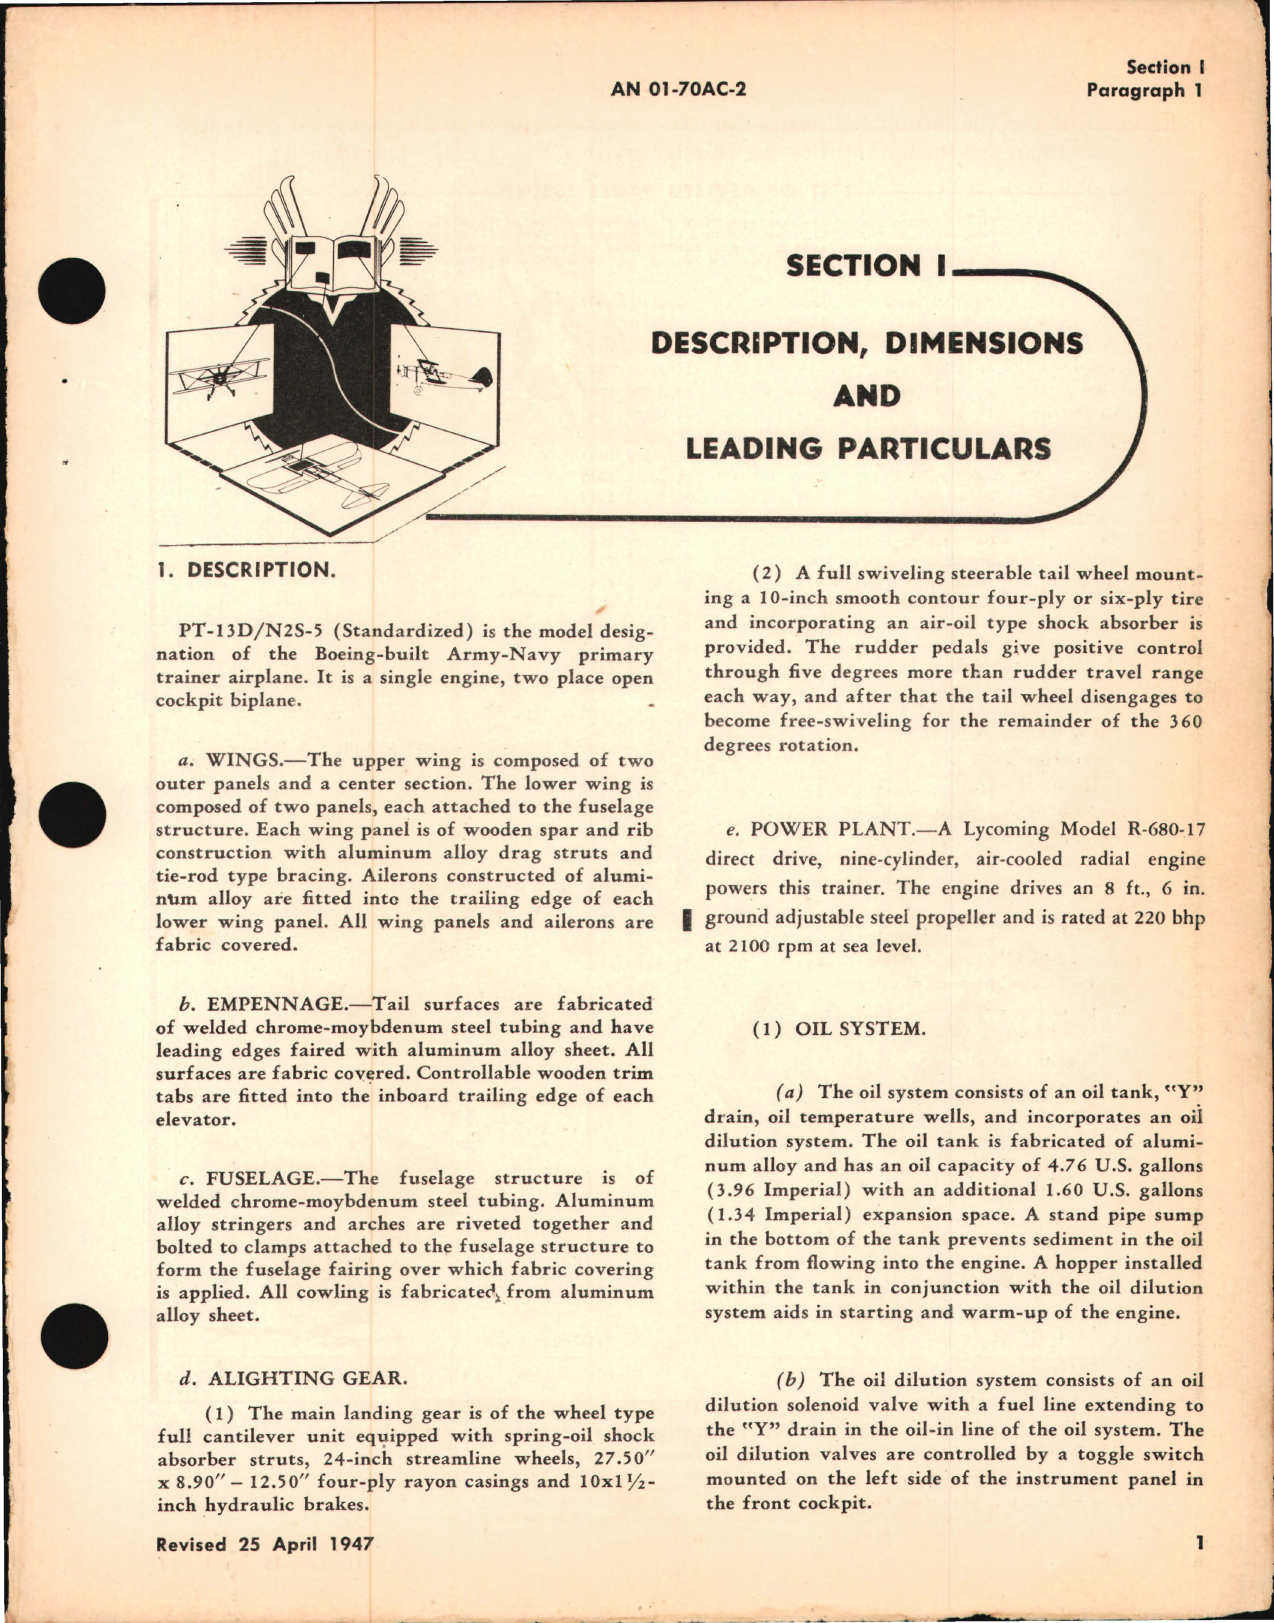 Sample page 7 from AirCorps Library document: Erection and Maintenance Instructions for PT-13D and N2S-5